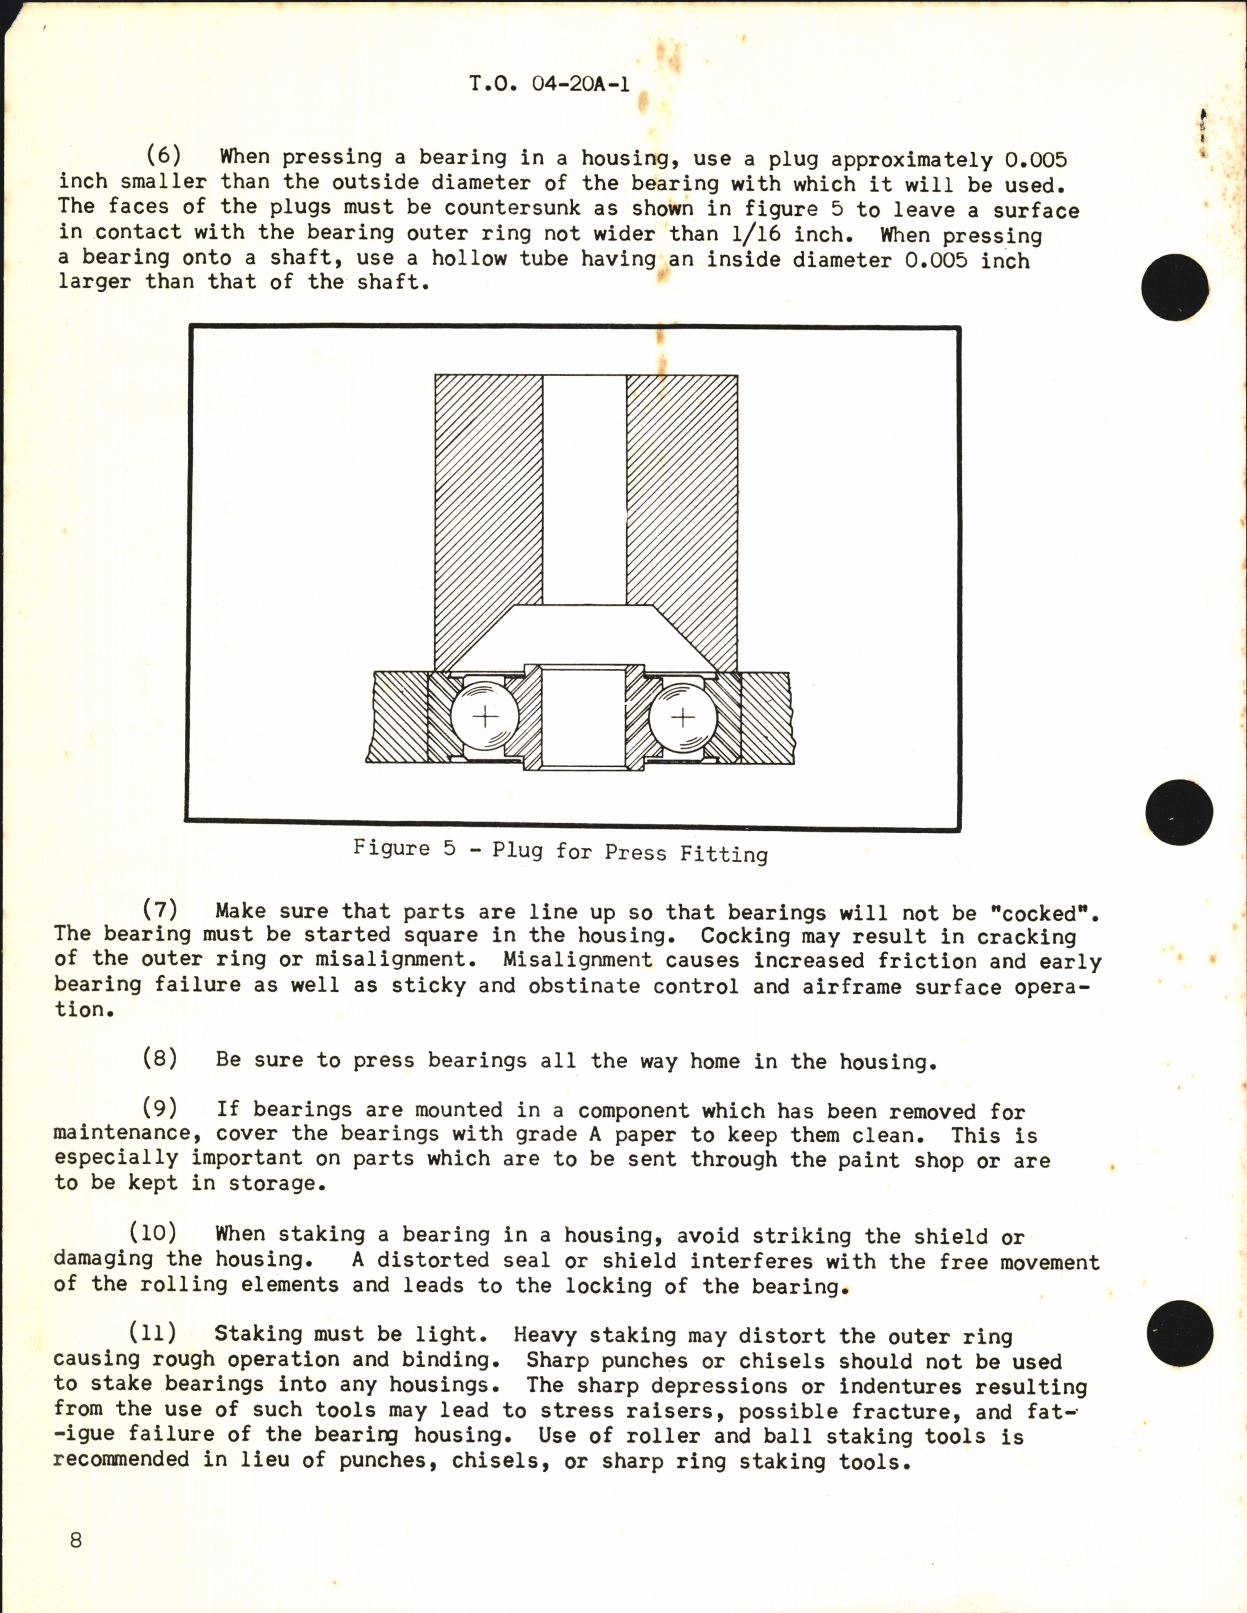 Sample page 6 from AirCorps Library document: Inspection and Maintenance of Airframe and Control Anti-friction Bearings